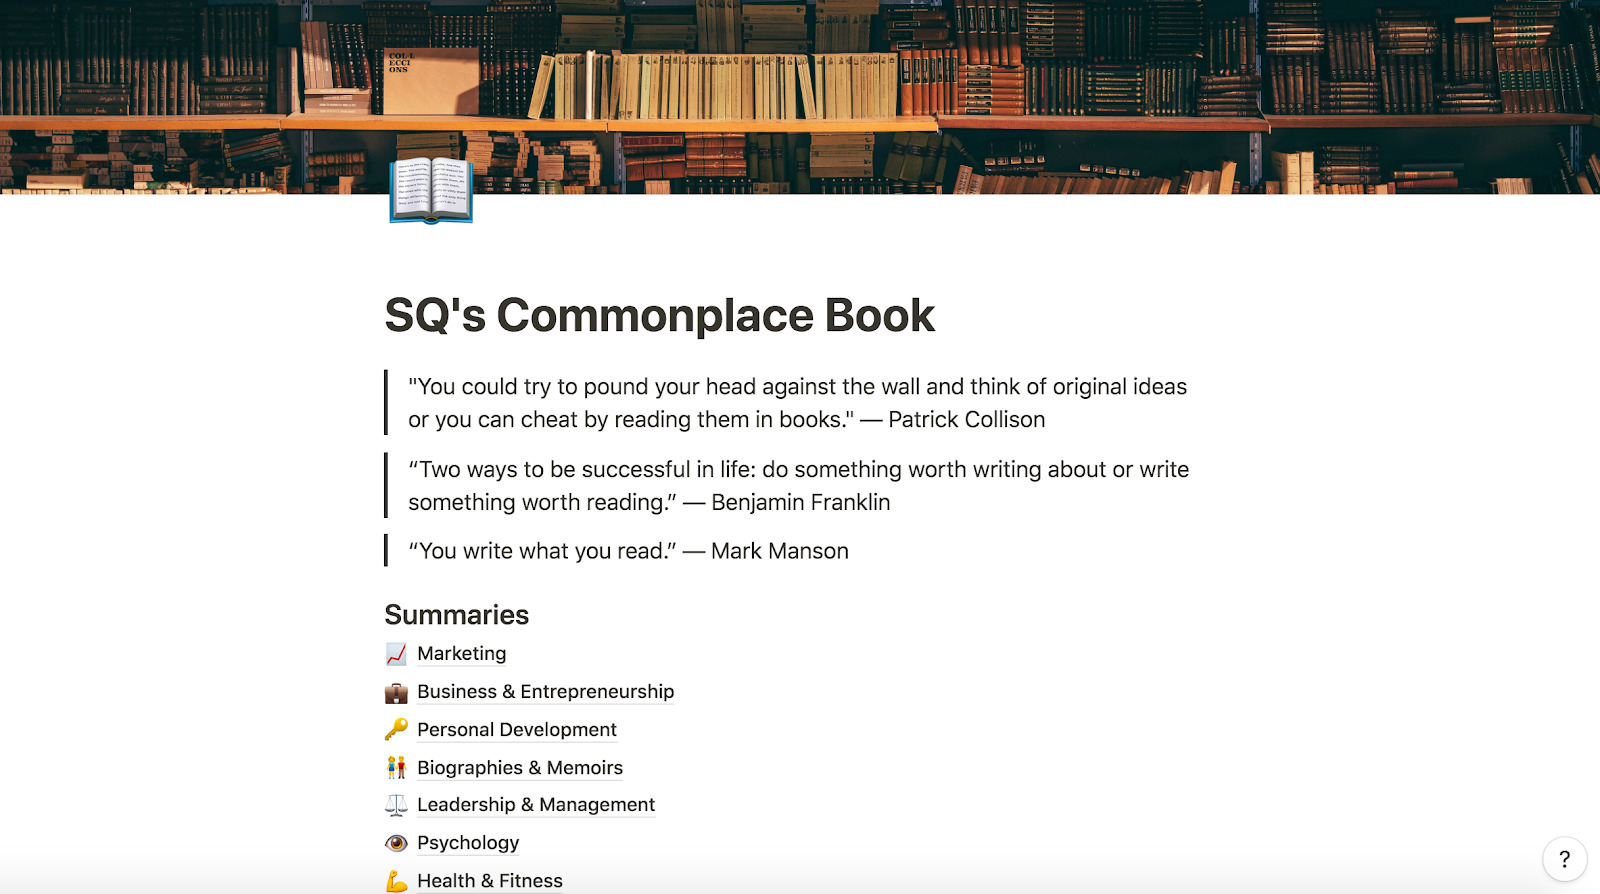 SQ s Commonplace Book" srcset="https://ahrefs.com/blog/wp-content/uploads/2019/10/SQ_s_Commonplace_Book.jpg 1600w, https://ahrefs.com/blog/wp-content/uploads/2019/10/SQ_s_Commonplace_Book-768x429.jpg 768w, https://ahrefs.com/blog/wp-content/uploads/2019/10/SQ_s_Commonplace_Book-680x380.jpg 680w" sizes="(max-width: 1600px) 100vw, 1600px